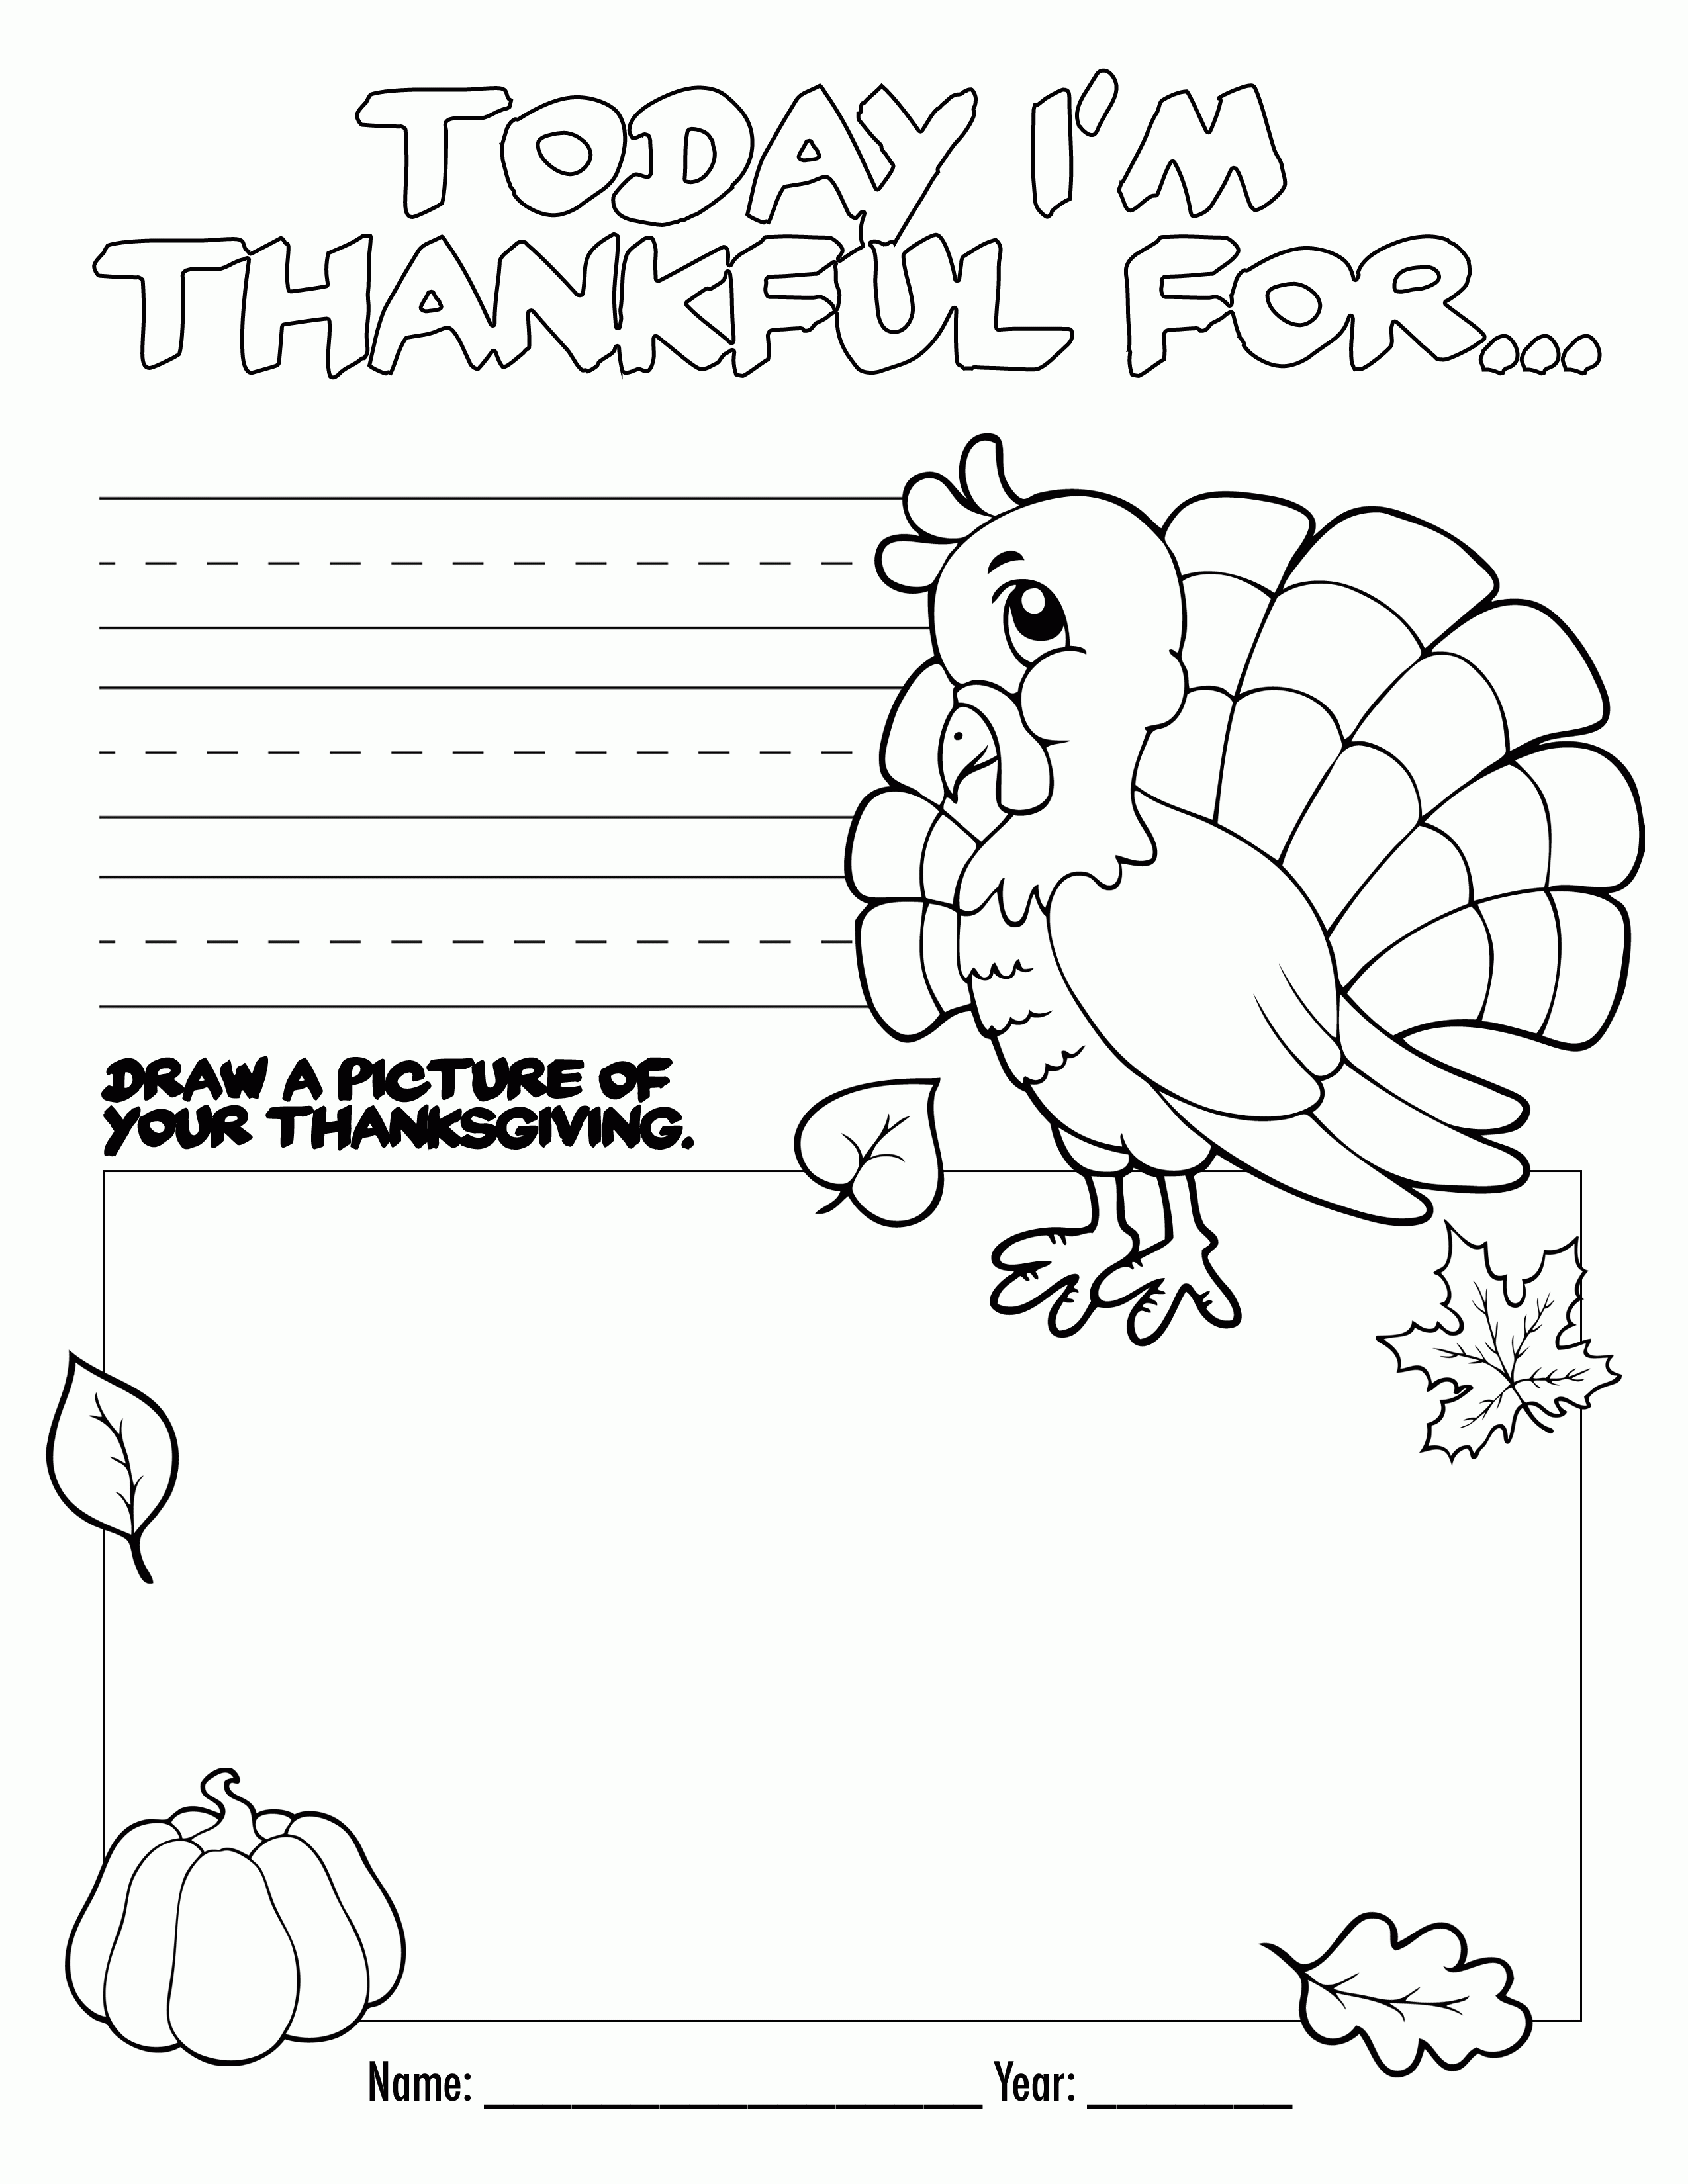 Thanksgiving Coloring Book free Printable   How To Nest For ...